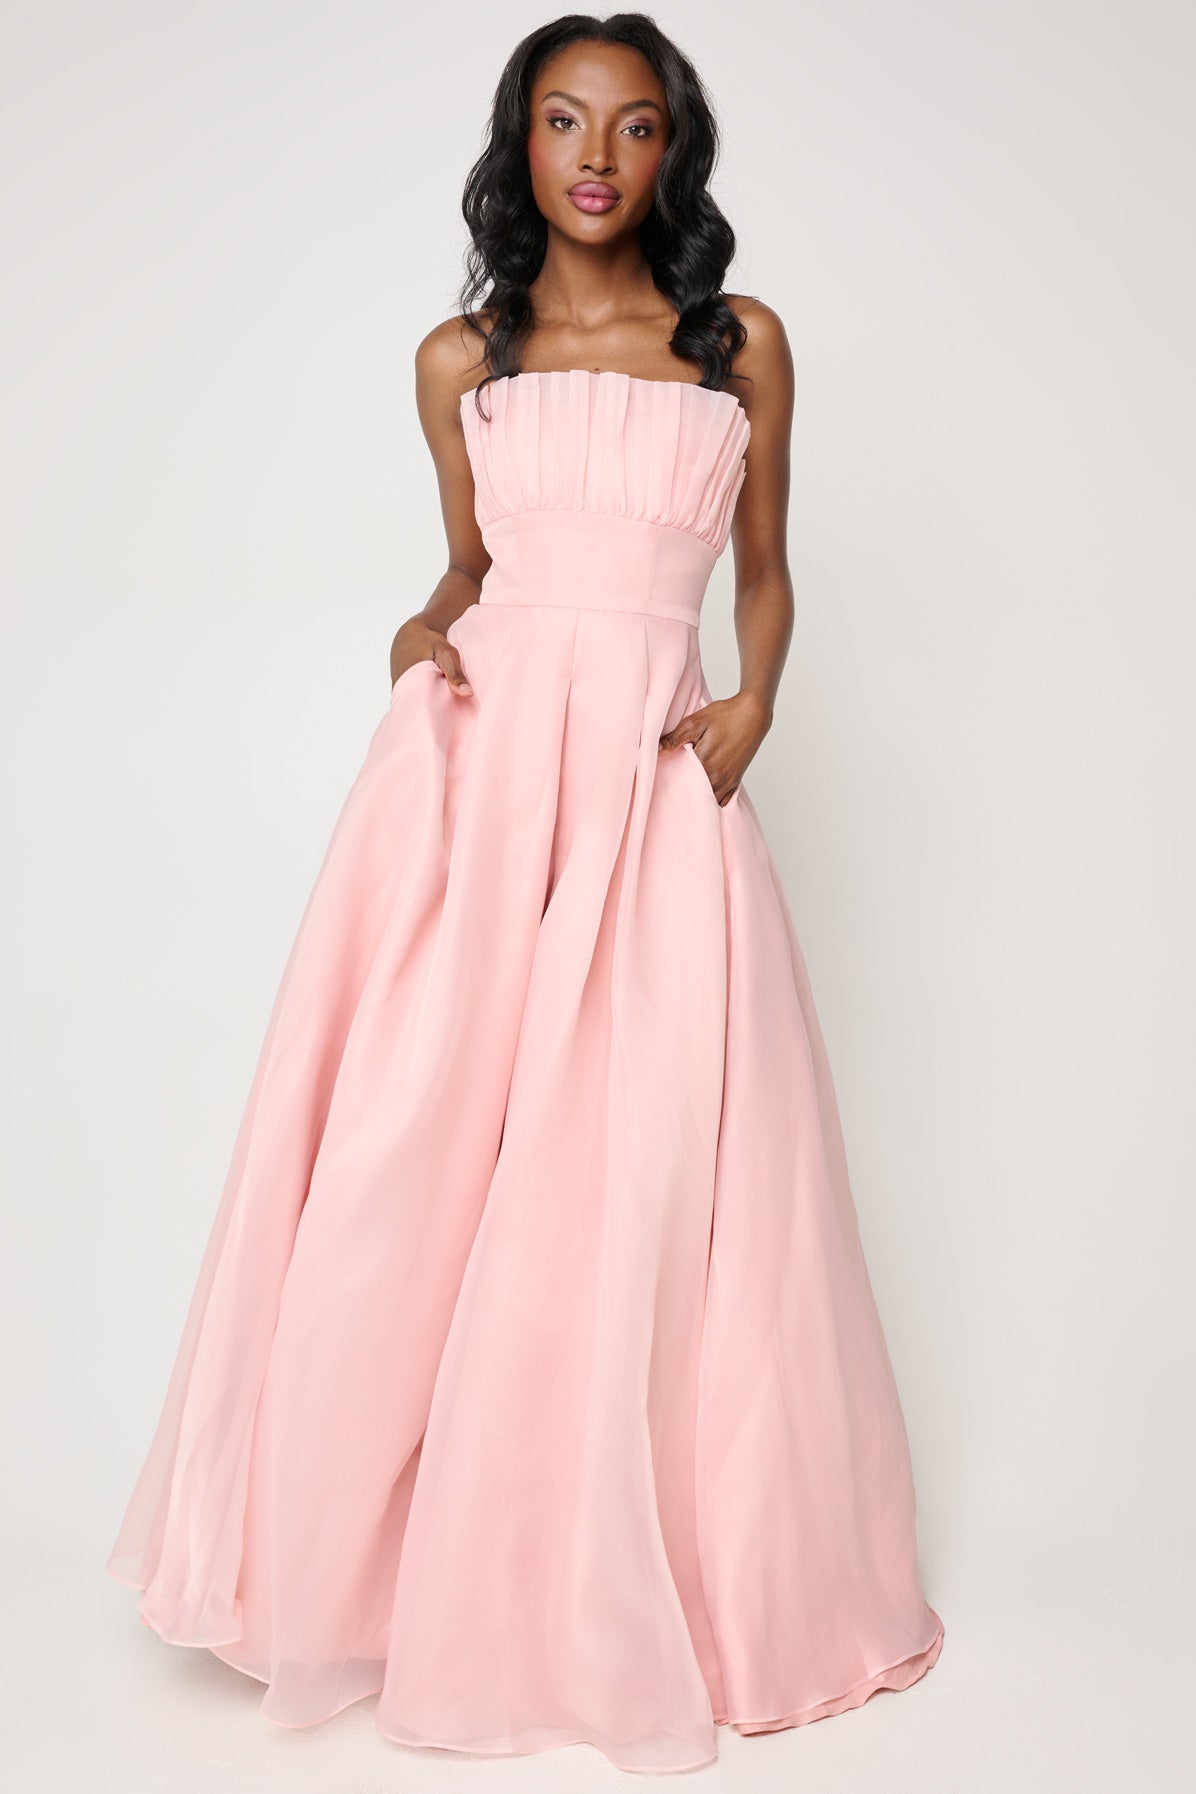 Evelyn Gown in Blush by Bariano - RENTAL